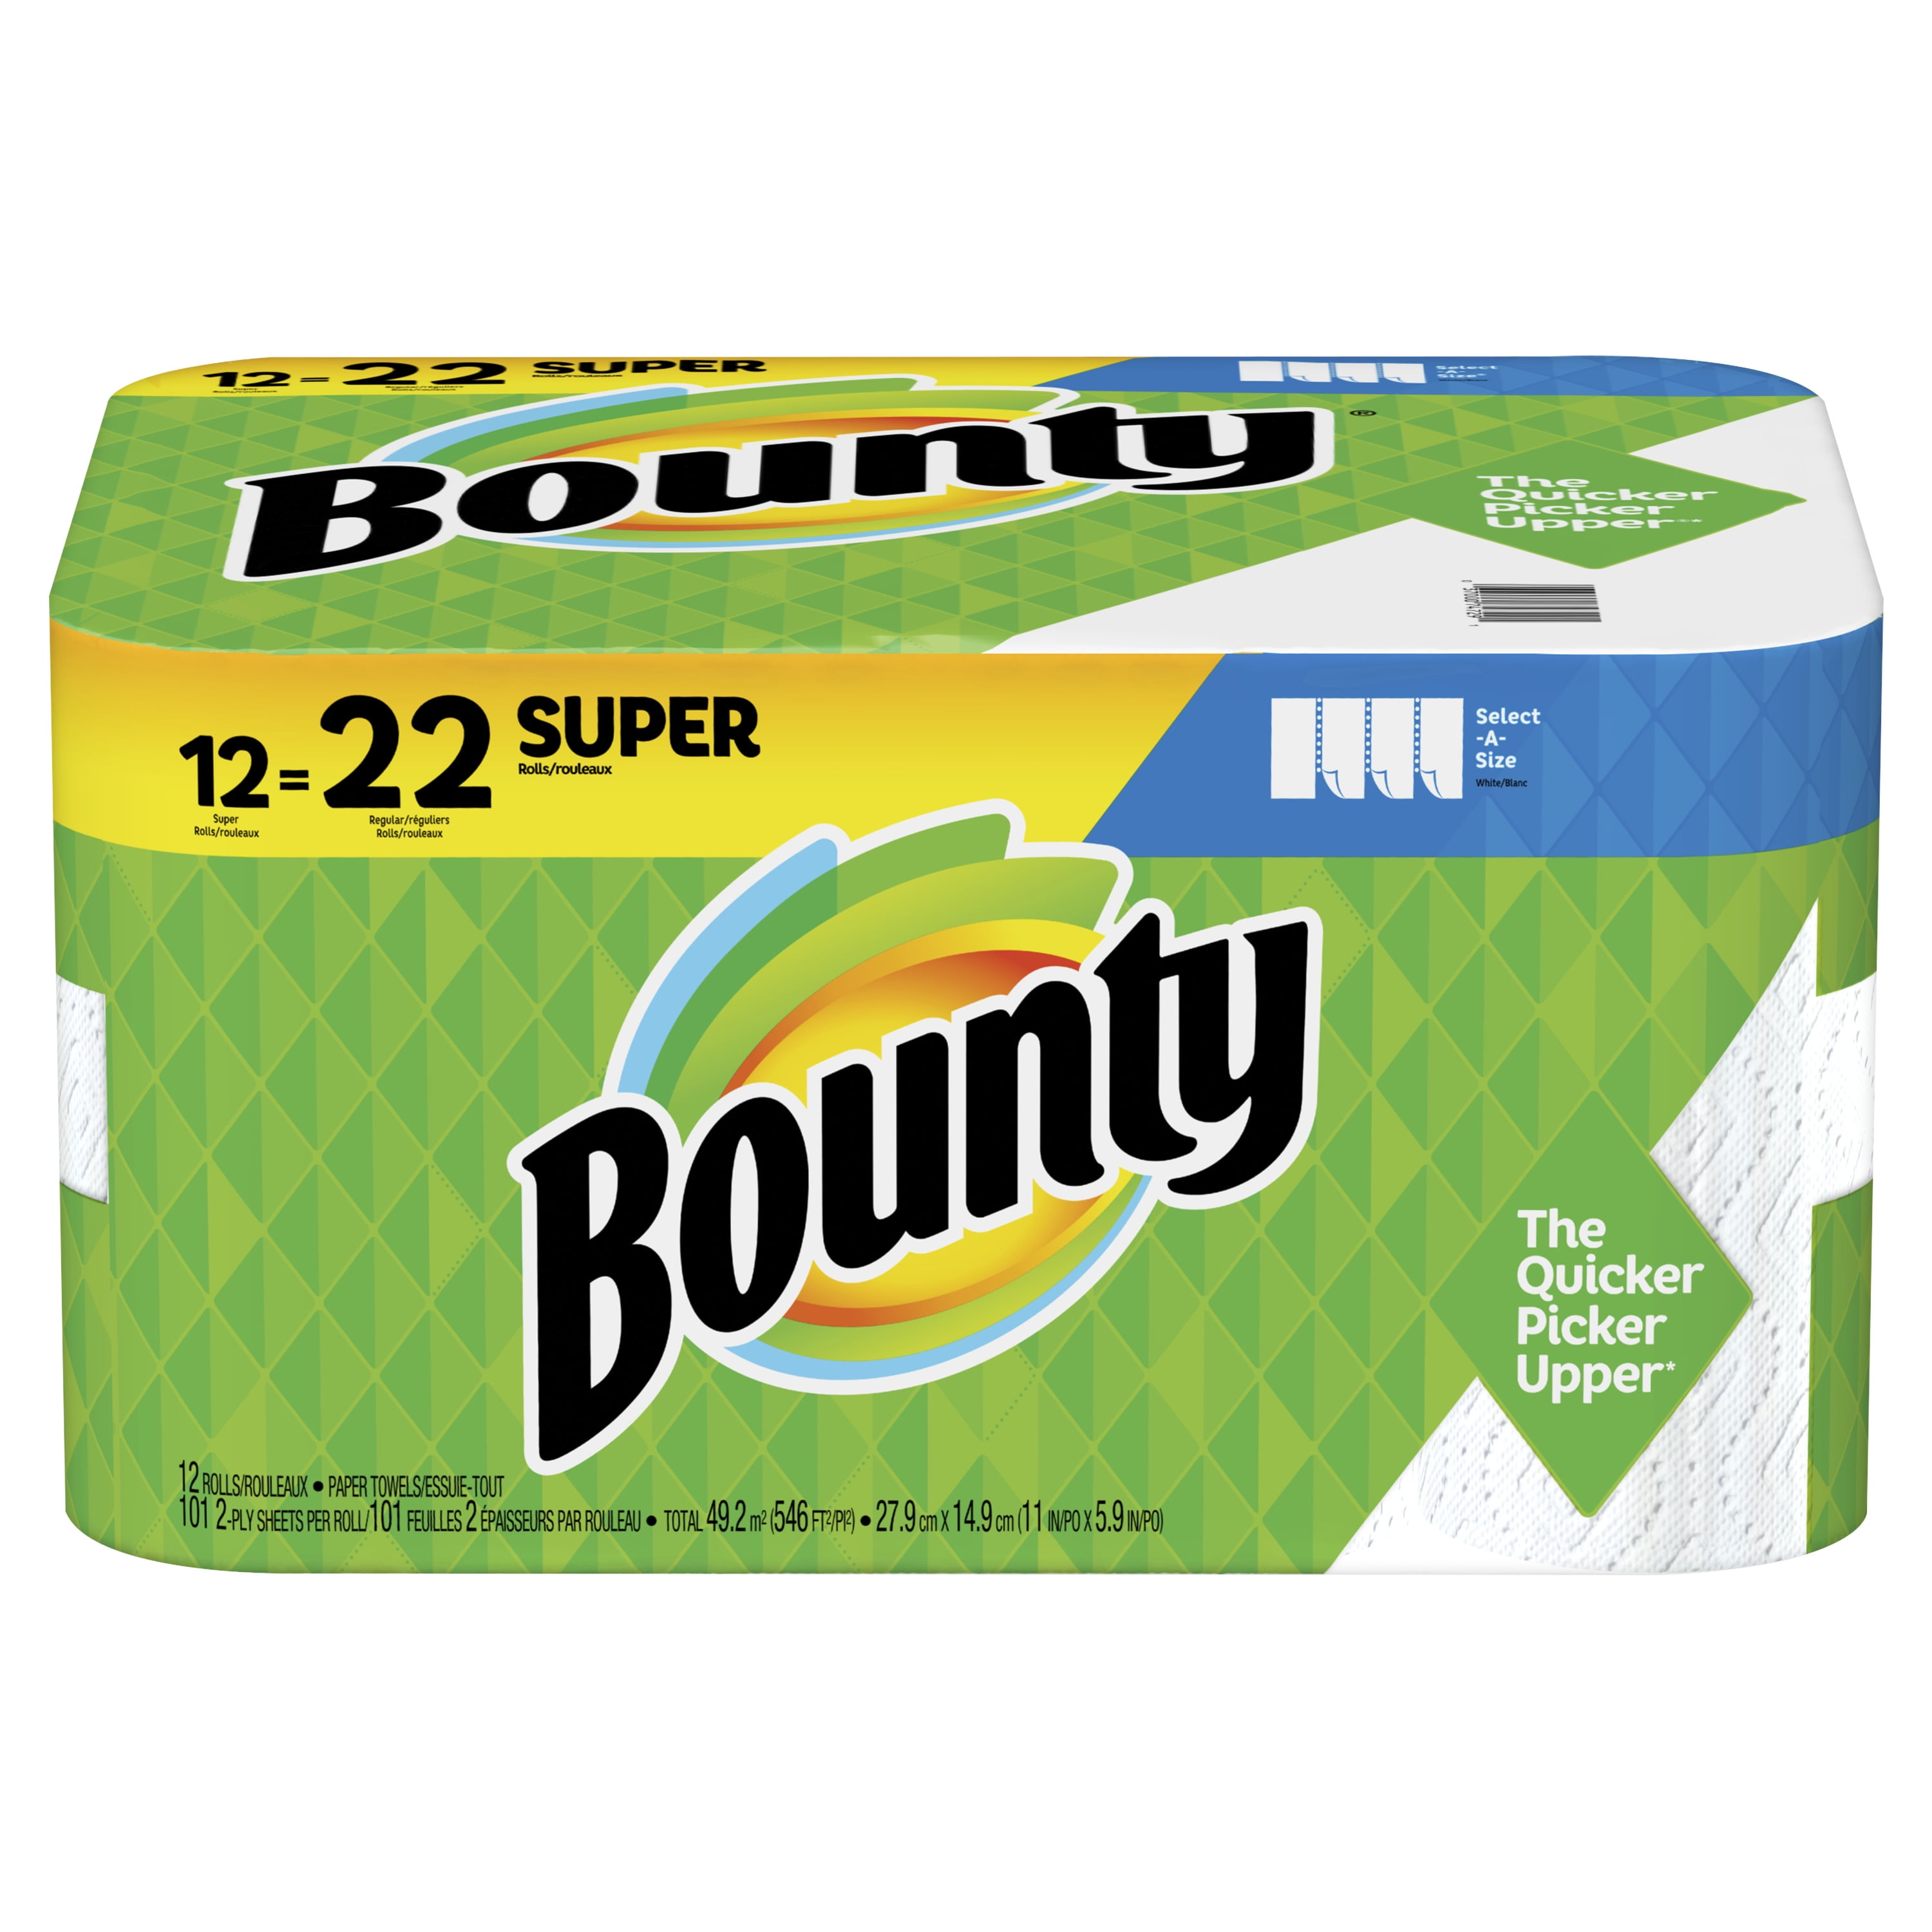 (32 Pack) Disposable Paper Towels 2-Ply